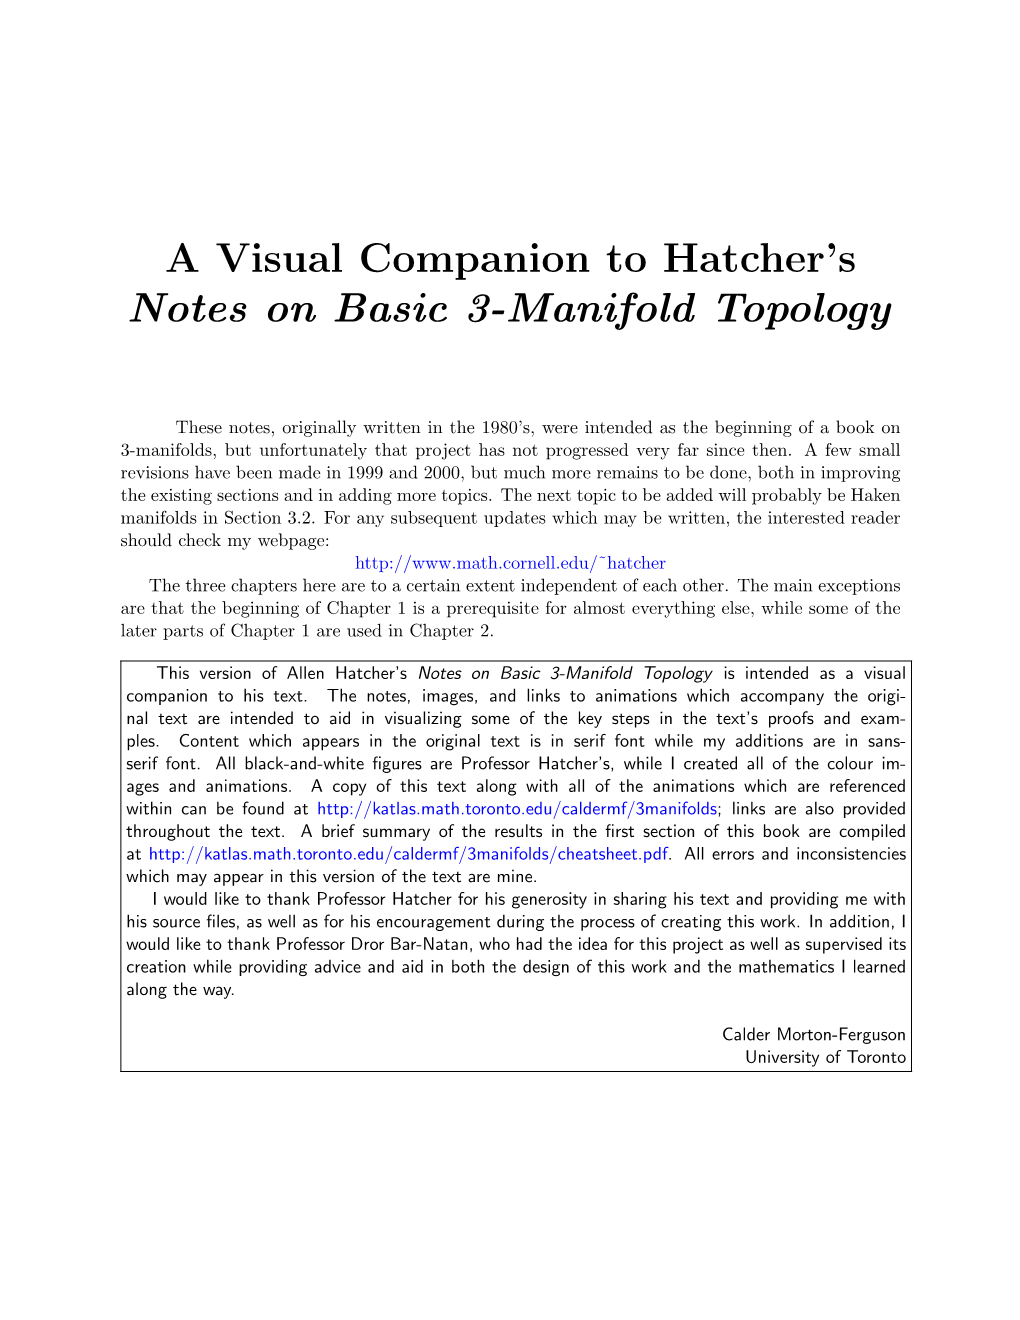 A Visual Companion to Hatcher's Notes on Basic 3-Manifold Topology